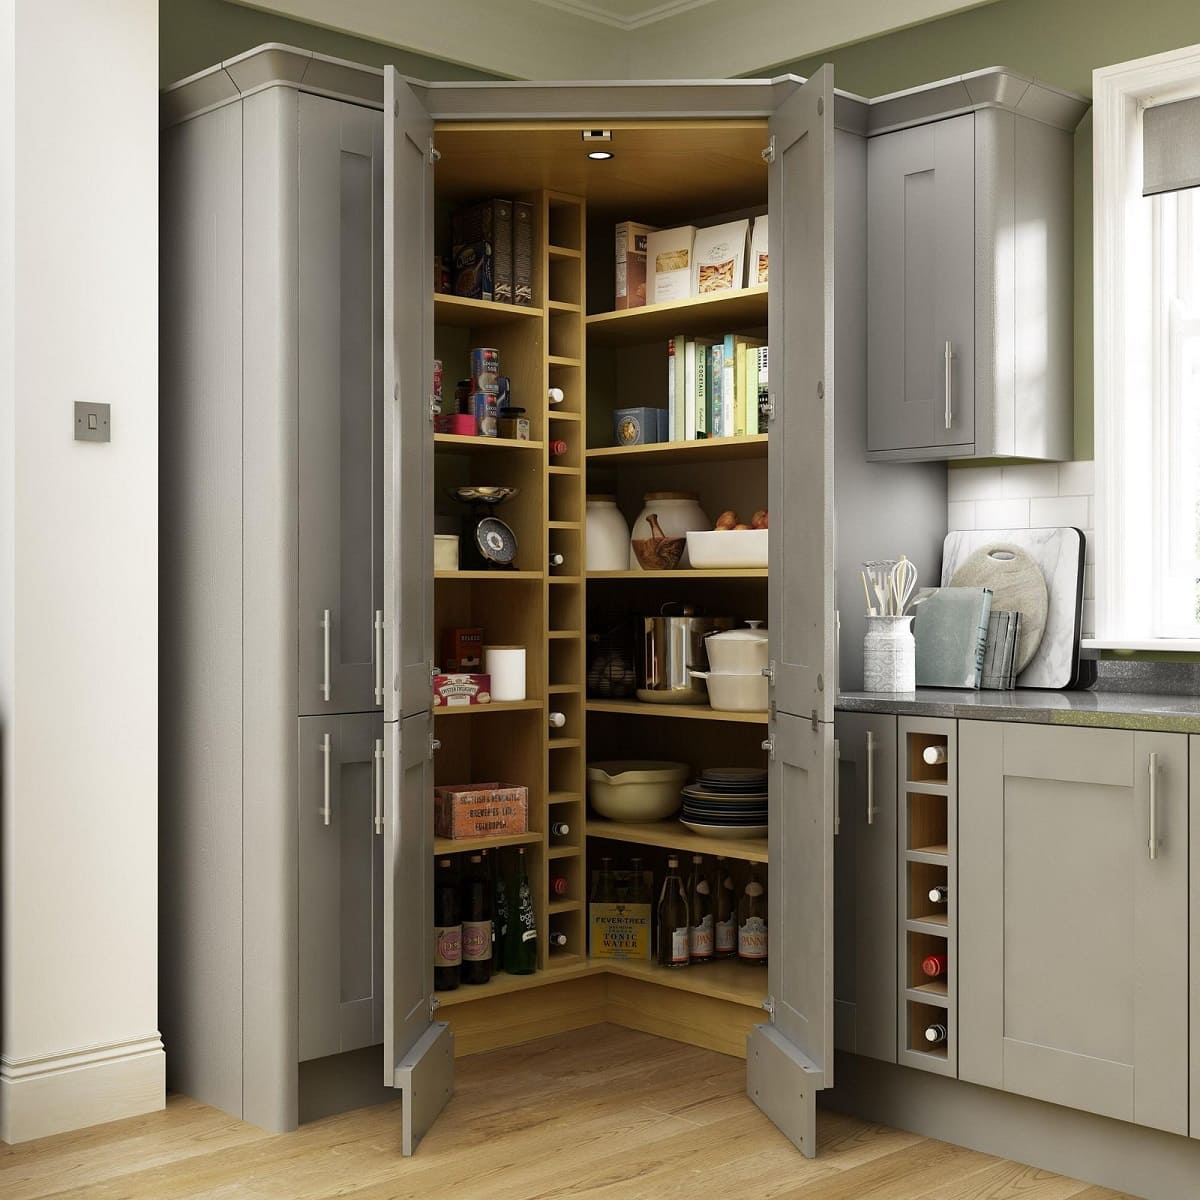 How To Install Pantry Cabinet